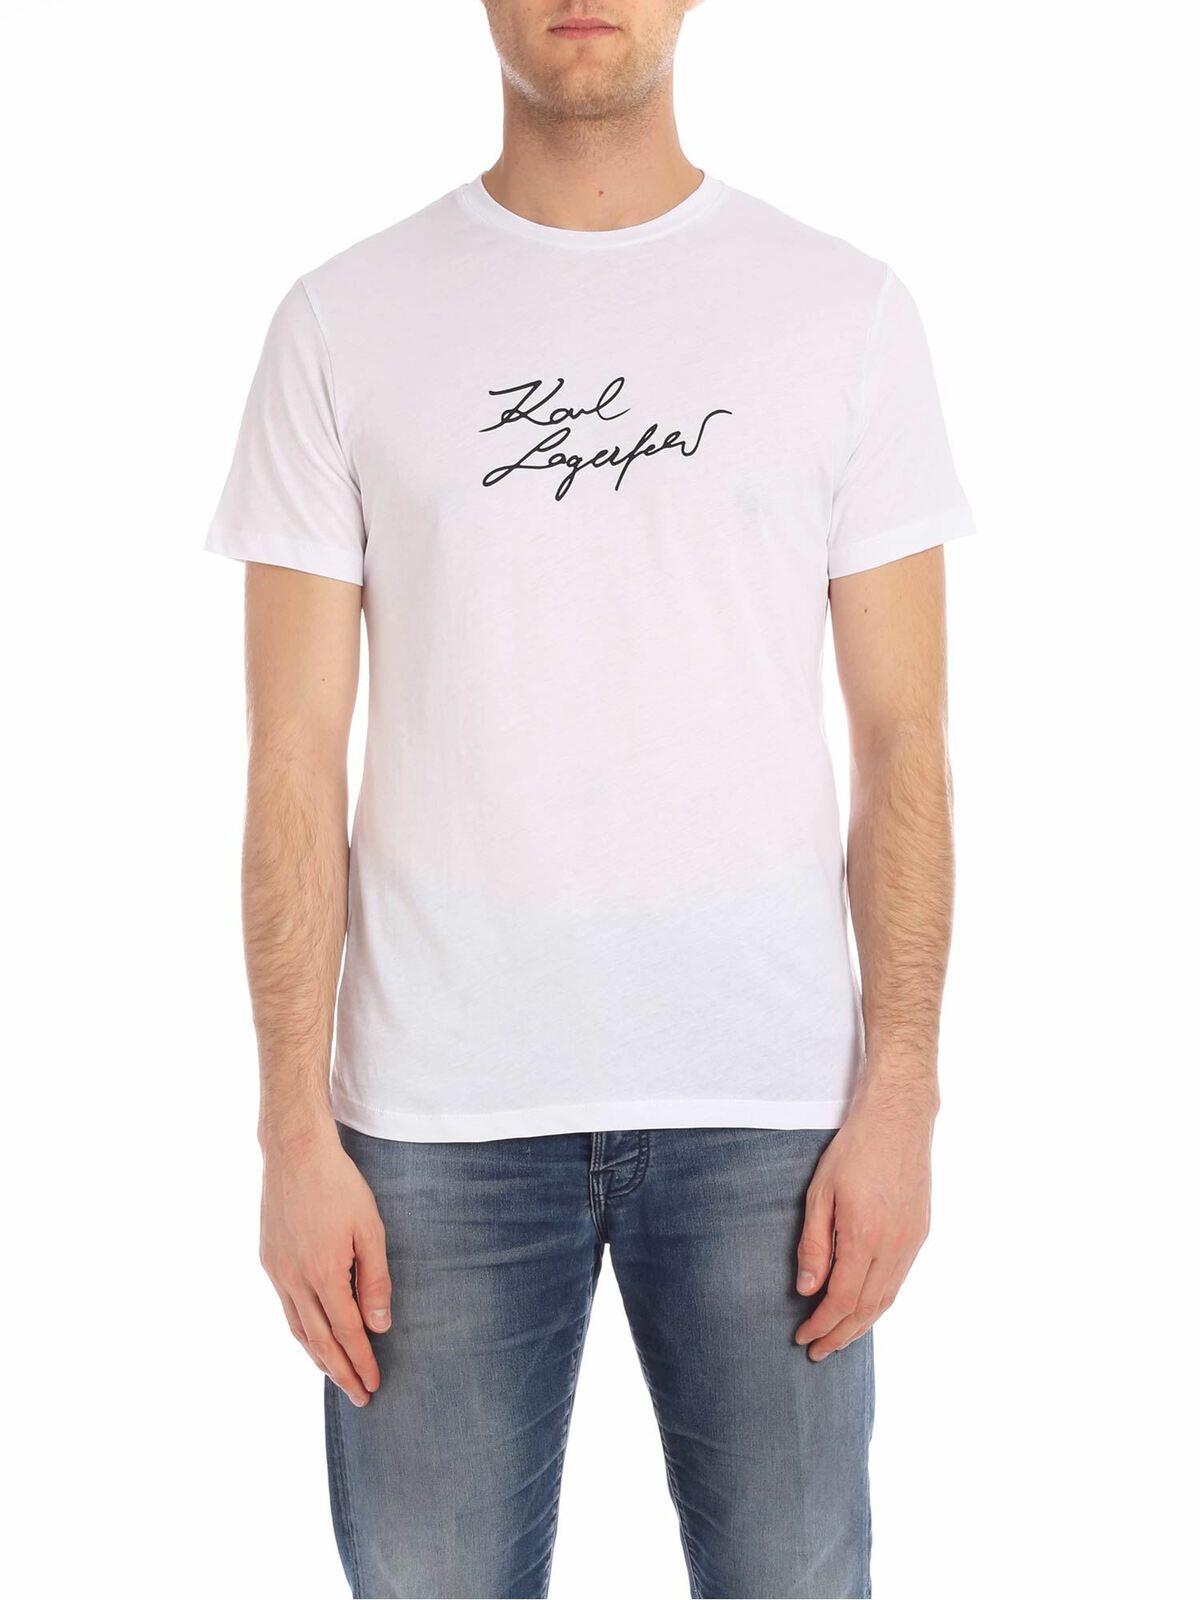 seinpaal wedstrijd voor T-shirts Karl Lagerfeld - Signature t-shirt in white - 75504159222010